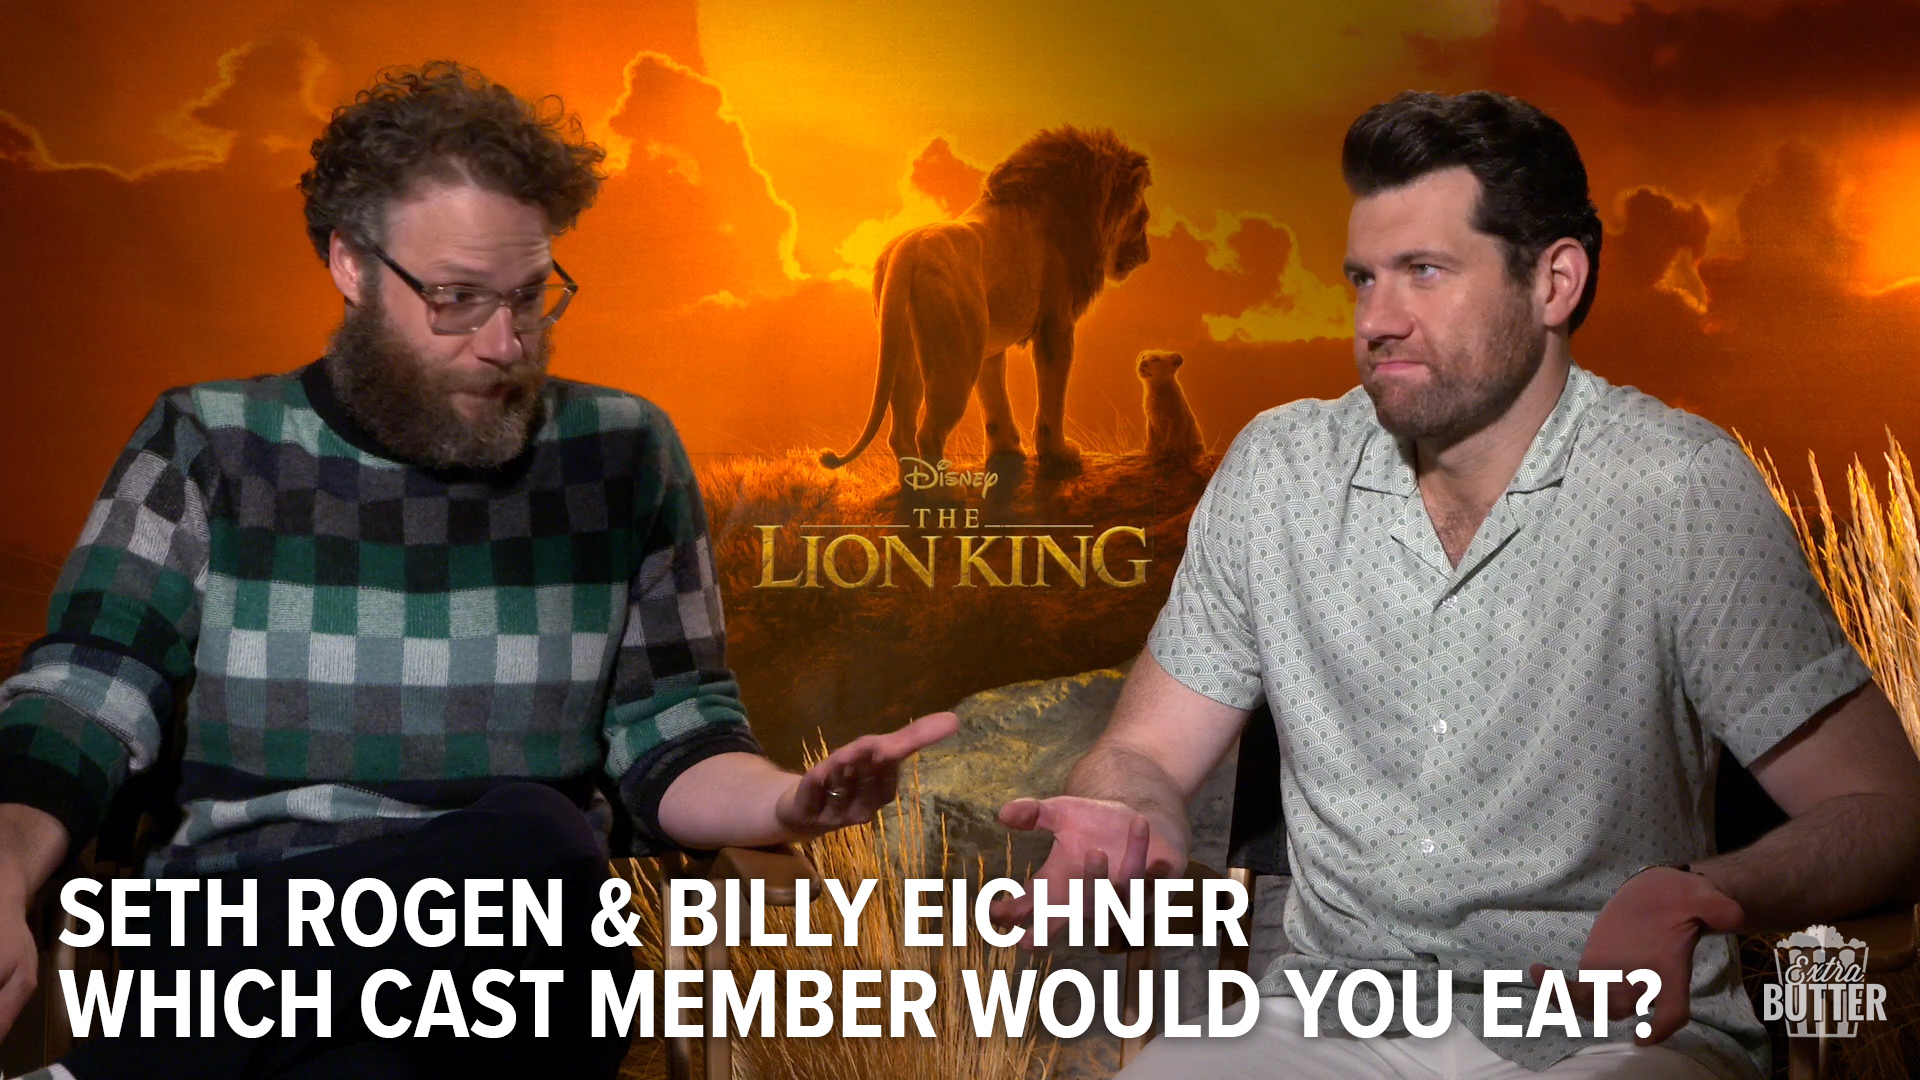 Seth Rogen and Billy Eichner take a question from an Extra Butter viewer about what cast member they would eat in the 'Lion King.' Seth also talks about his singing performance.